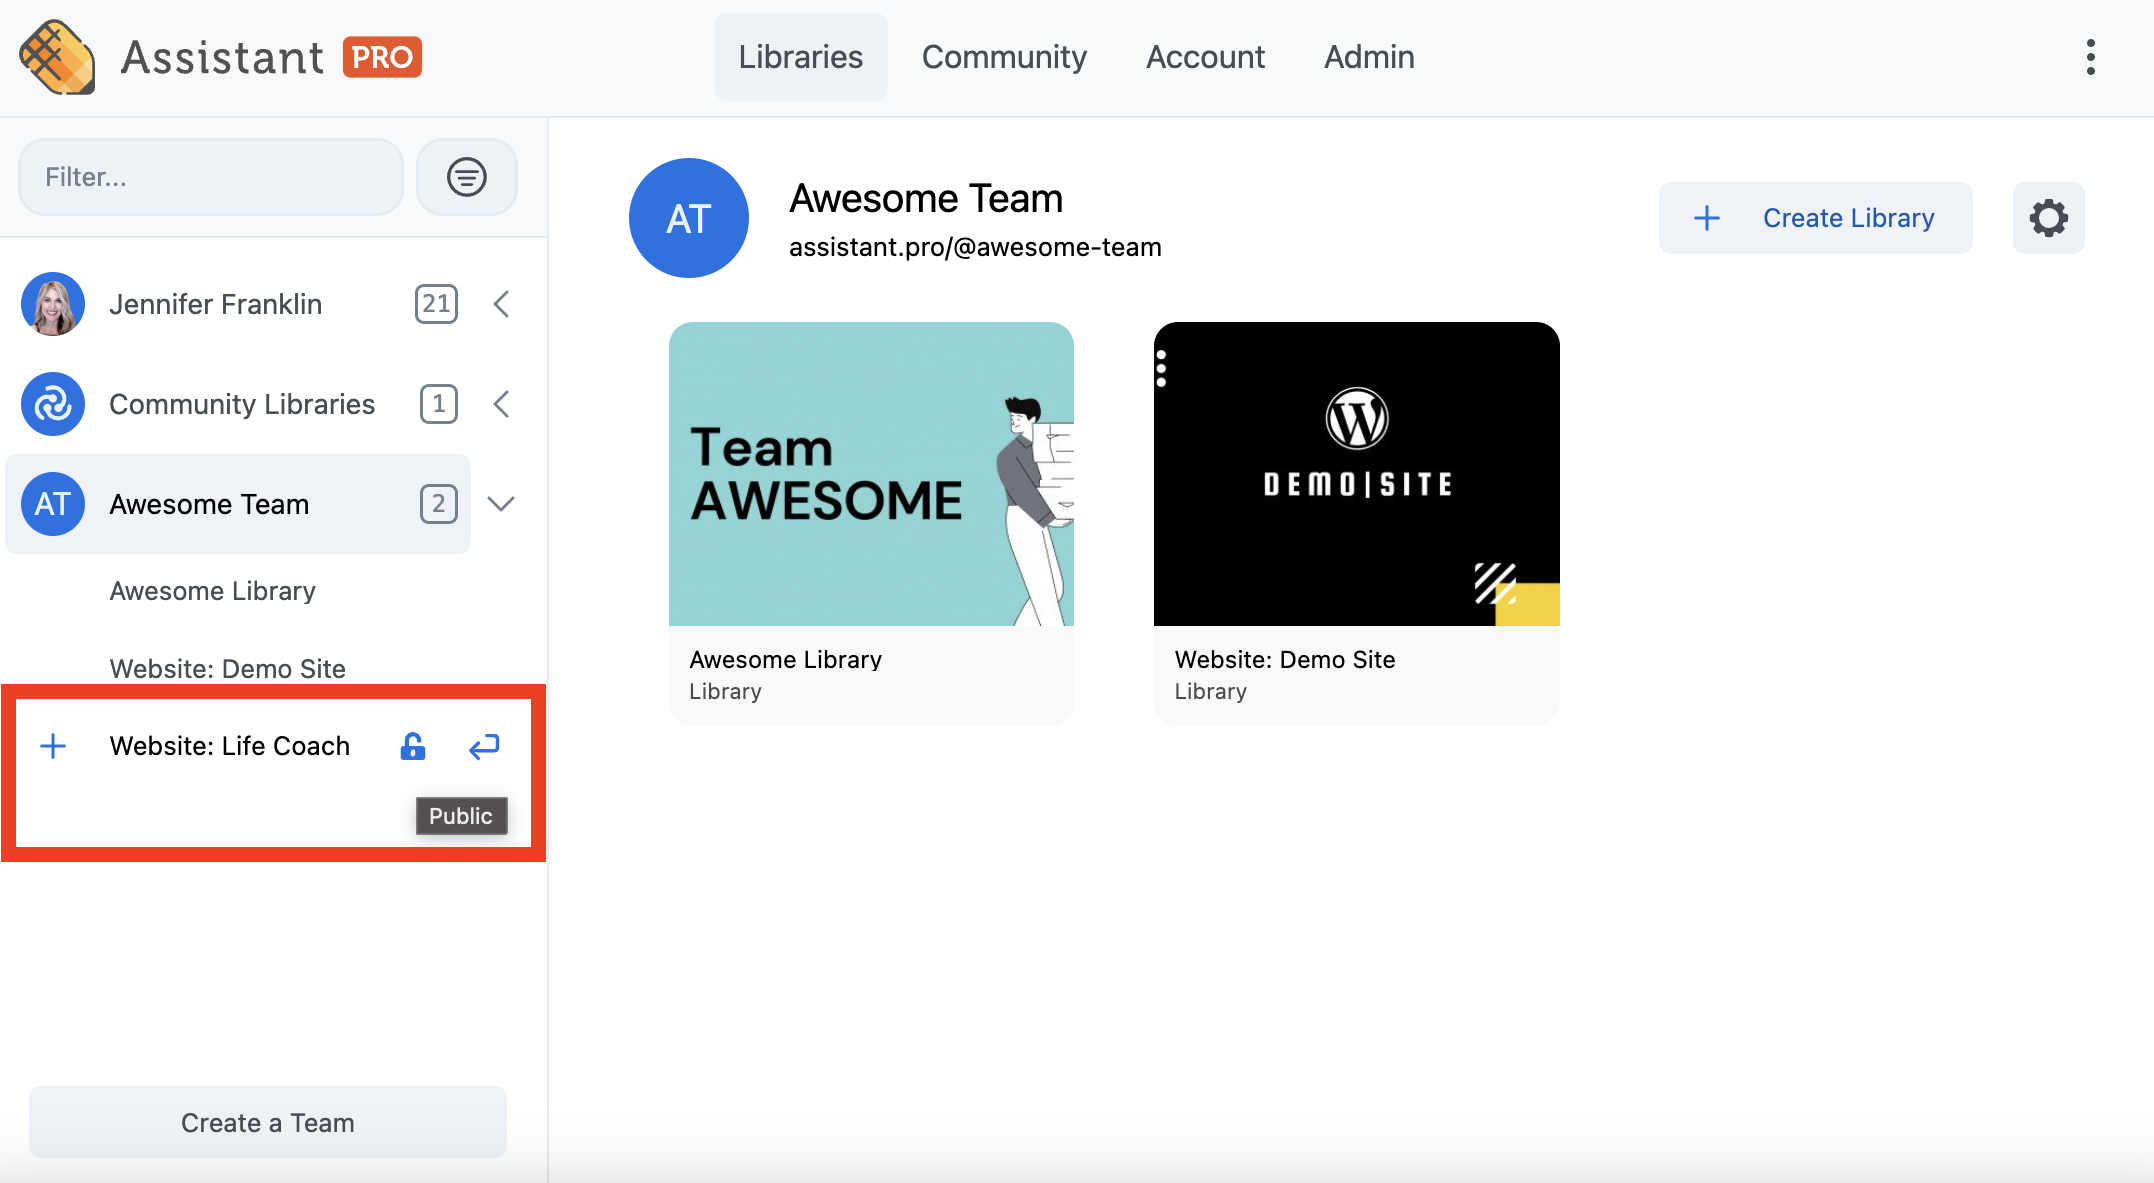 Assistant Pro create a library and enter a name